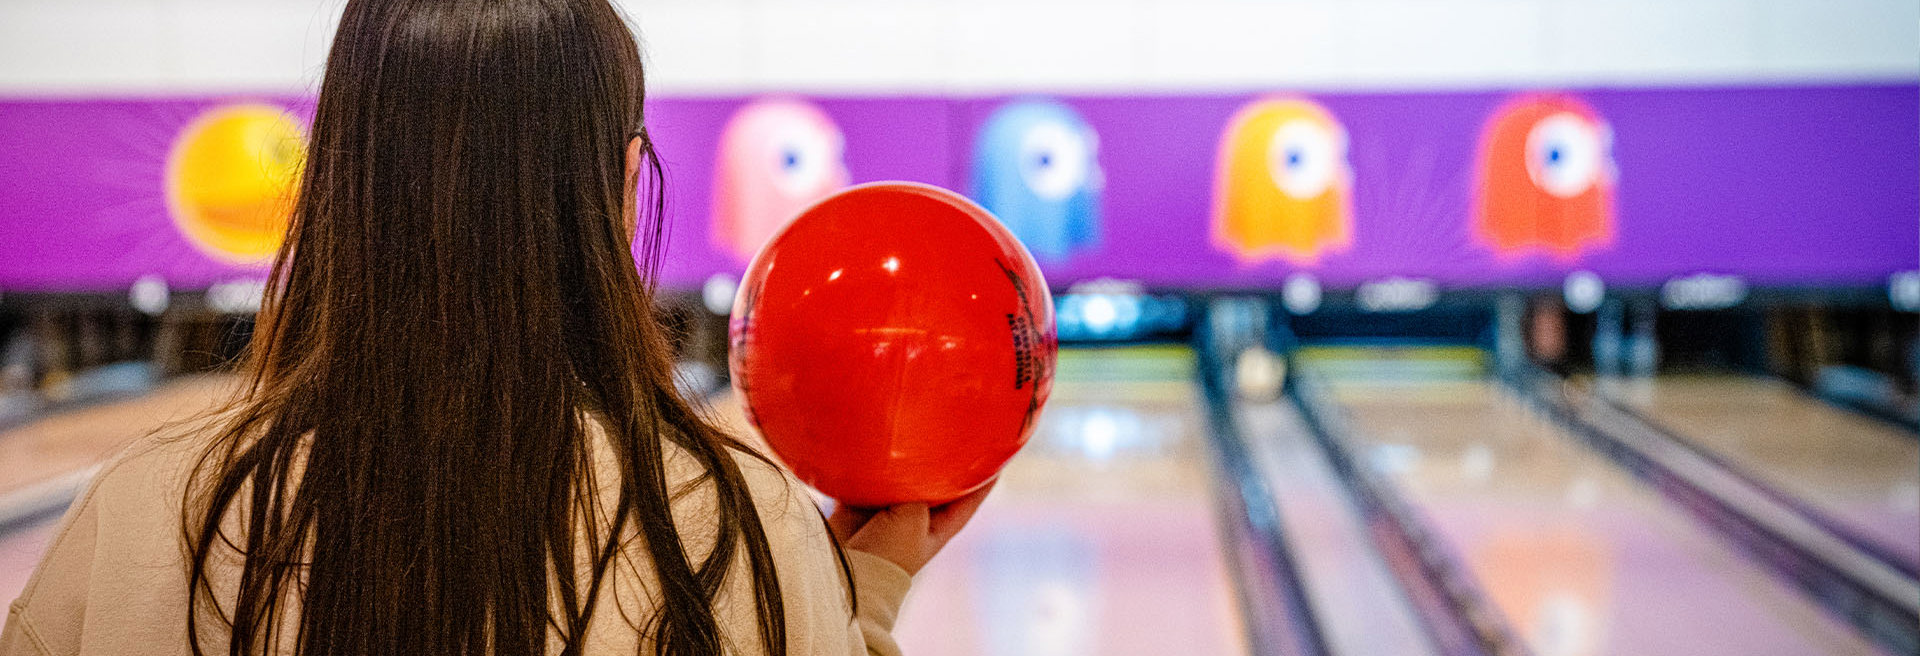 girl holding a bowling ball ready to bowl at namco funscape